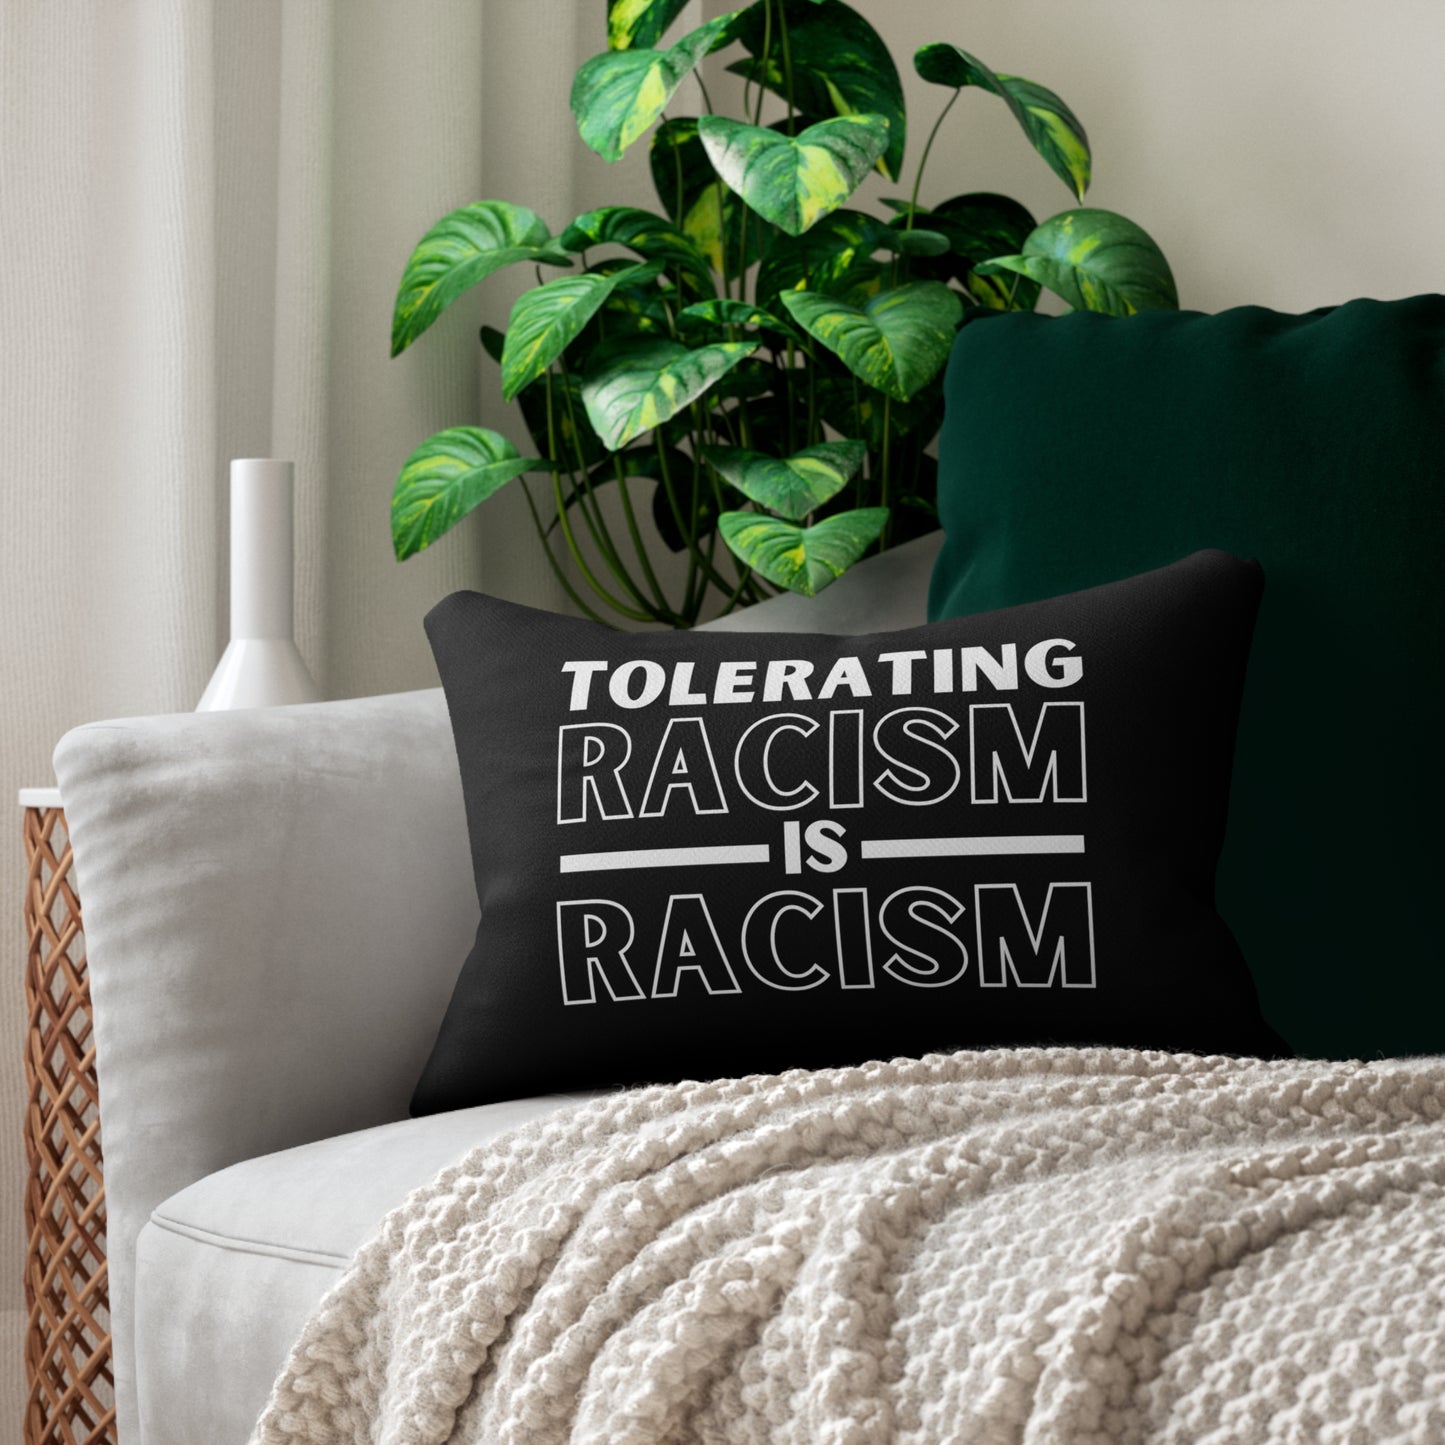 Encourage a culture of inclusivity and awareness with this pillow that makes it clear: "Tolerating racism is racism." Black pillow, white design, size: 20" x 14"